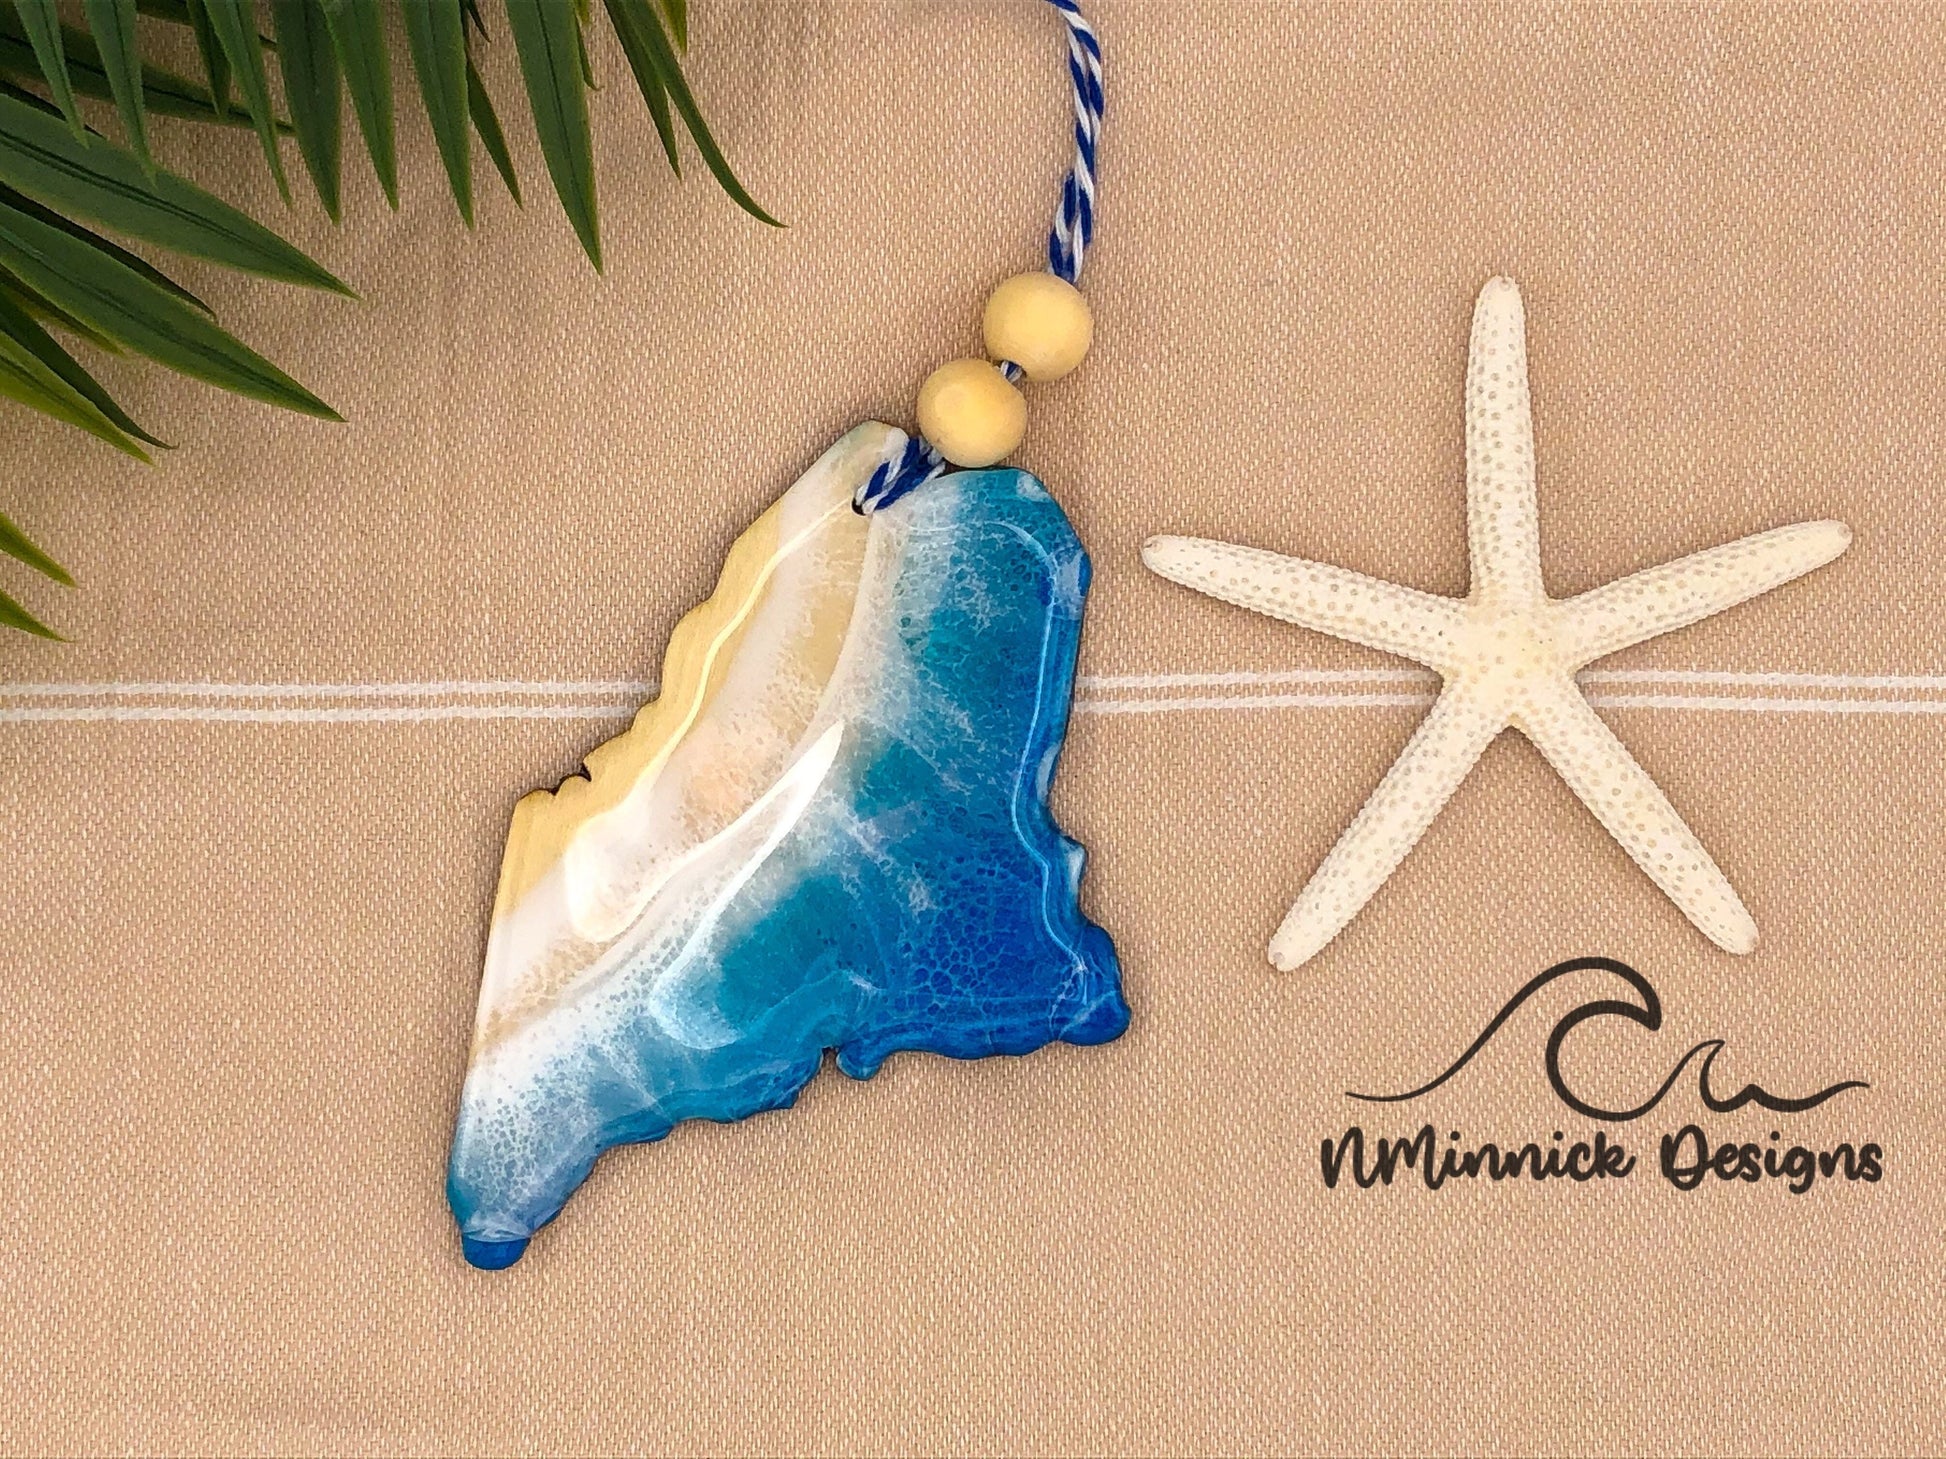 Maine-shaped wooden Christmas ornament covered in blue and teal colored ocean resin art resembling the waves along Maine&#39;s Atlantic Coast. Finished with blue and white baker&#39;s twine and two wooden beads.